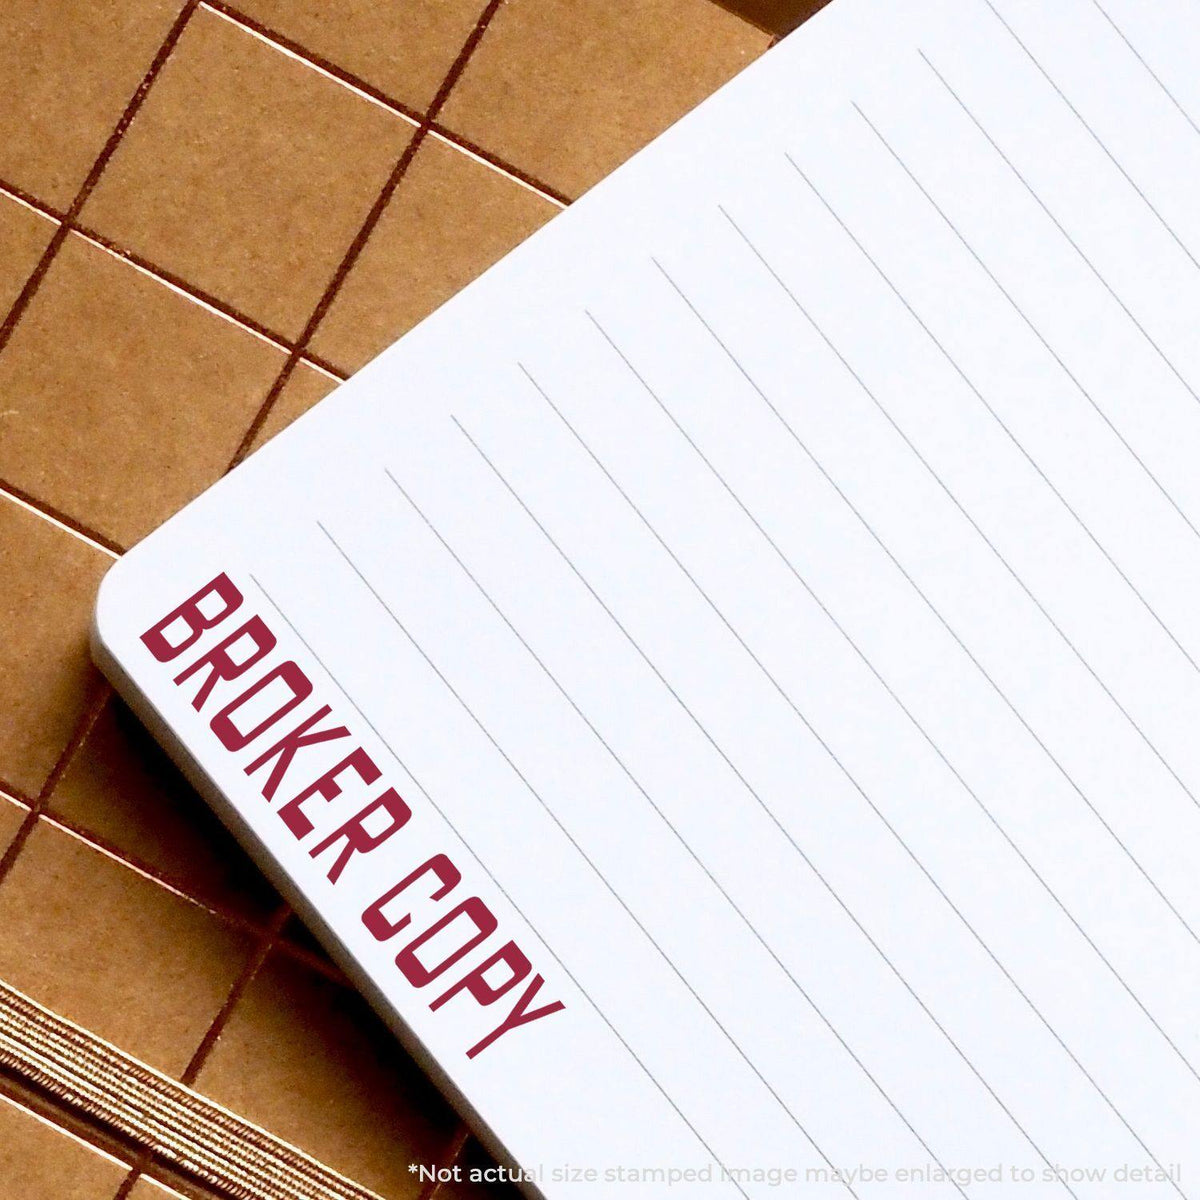 In Use Large Broker Copy Rubber Stamp Image